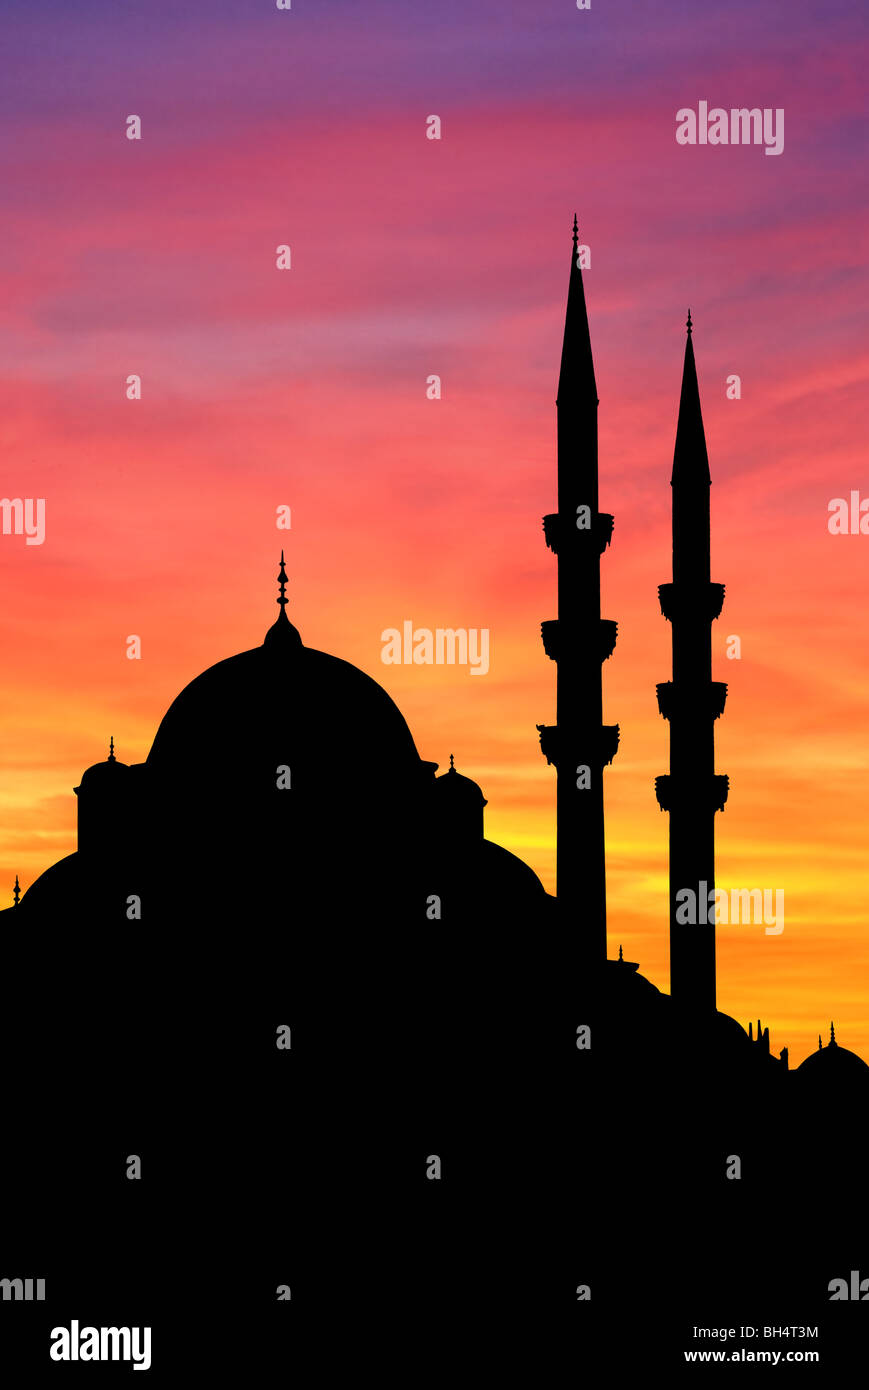 Silhouette of Yeni camii mosque at sunset in Istanbul, Turkey. Stock Photo